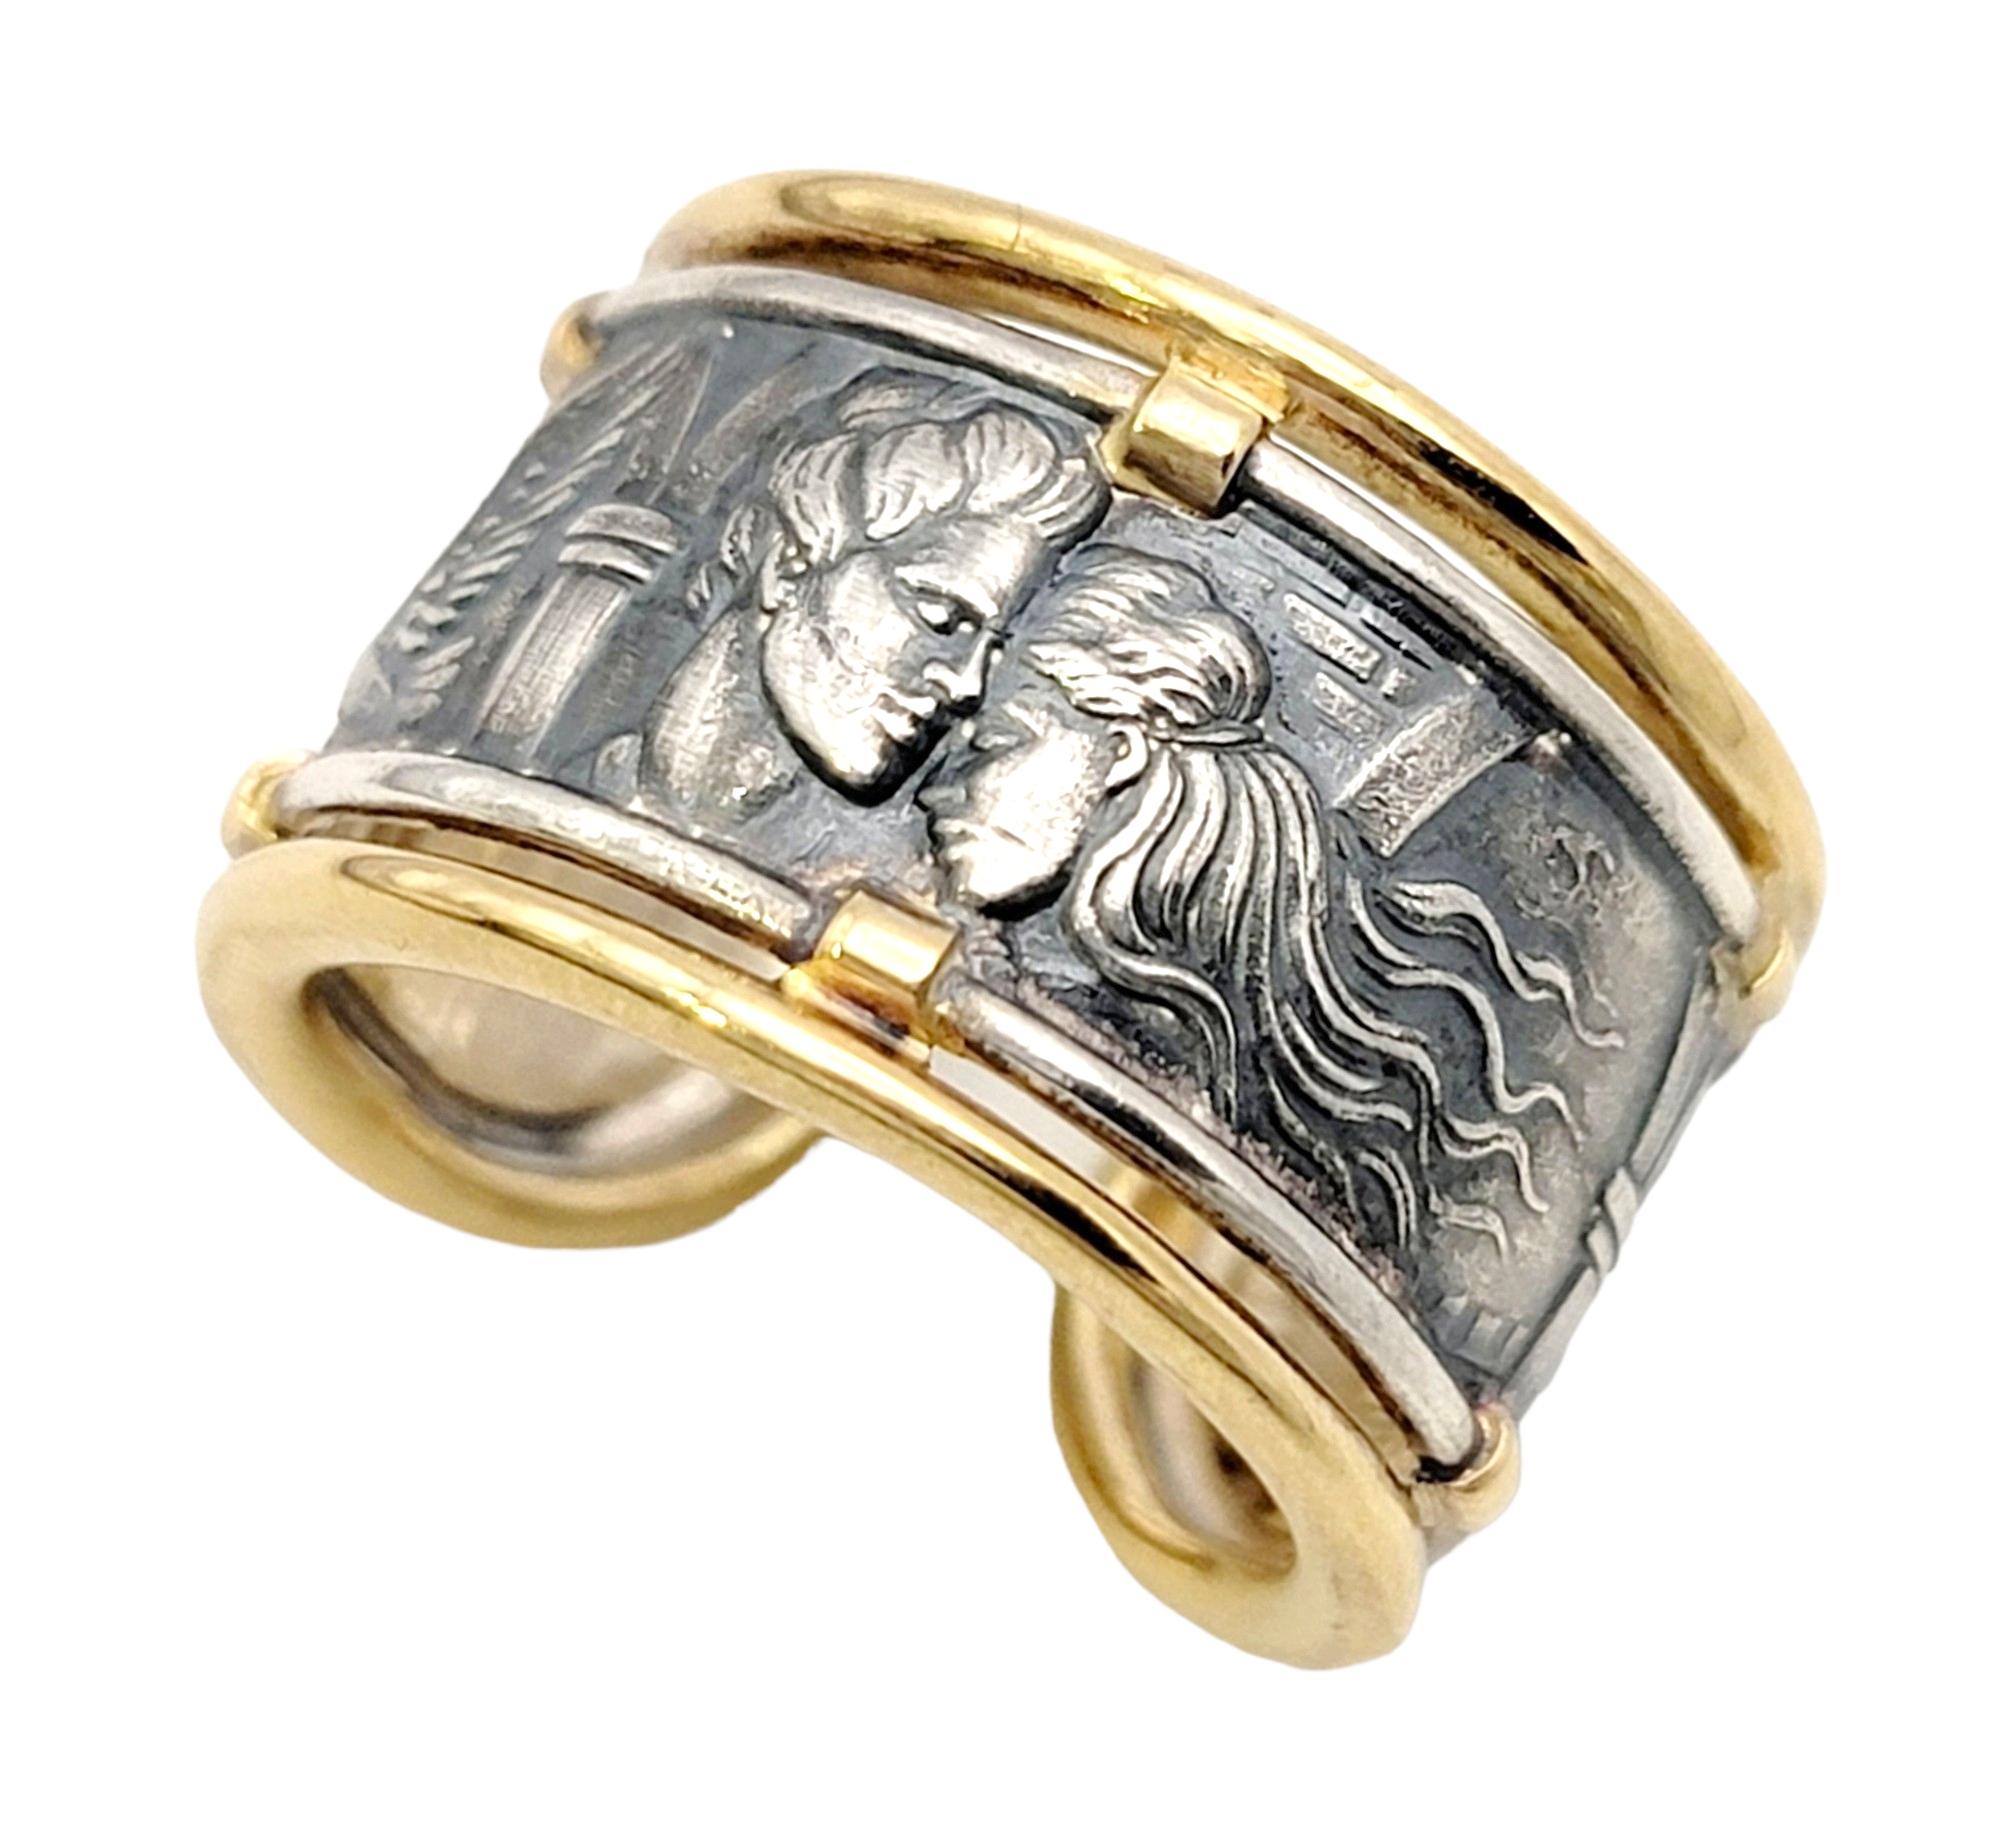 Ring size: 7

This unique Carrera y Carrera Romeo and Juliet band ring tells a story with simply a look. Meticulously crafted in sterling silver and adorned with lavish 18K yellow gold accents, this exquisite piece combines artistry and romance in